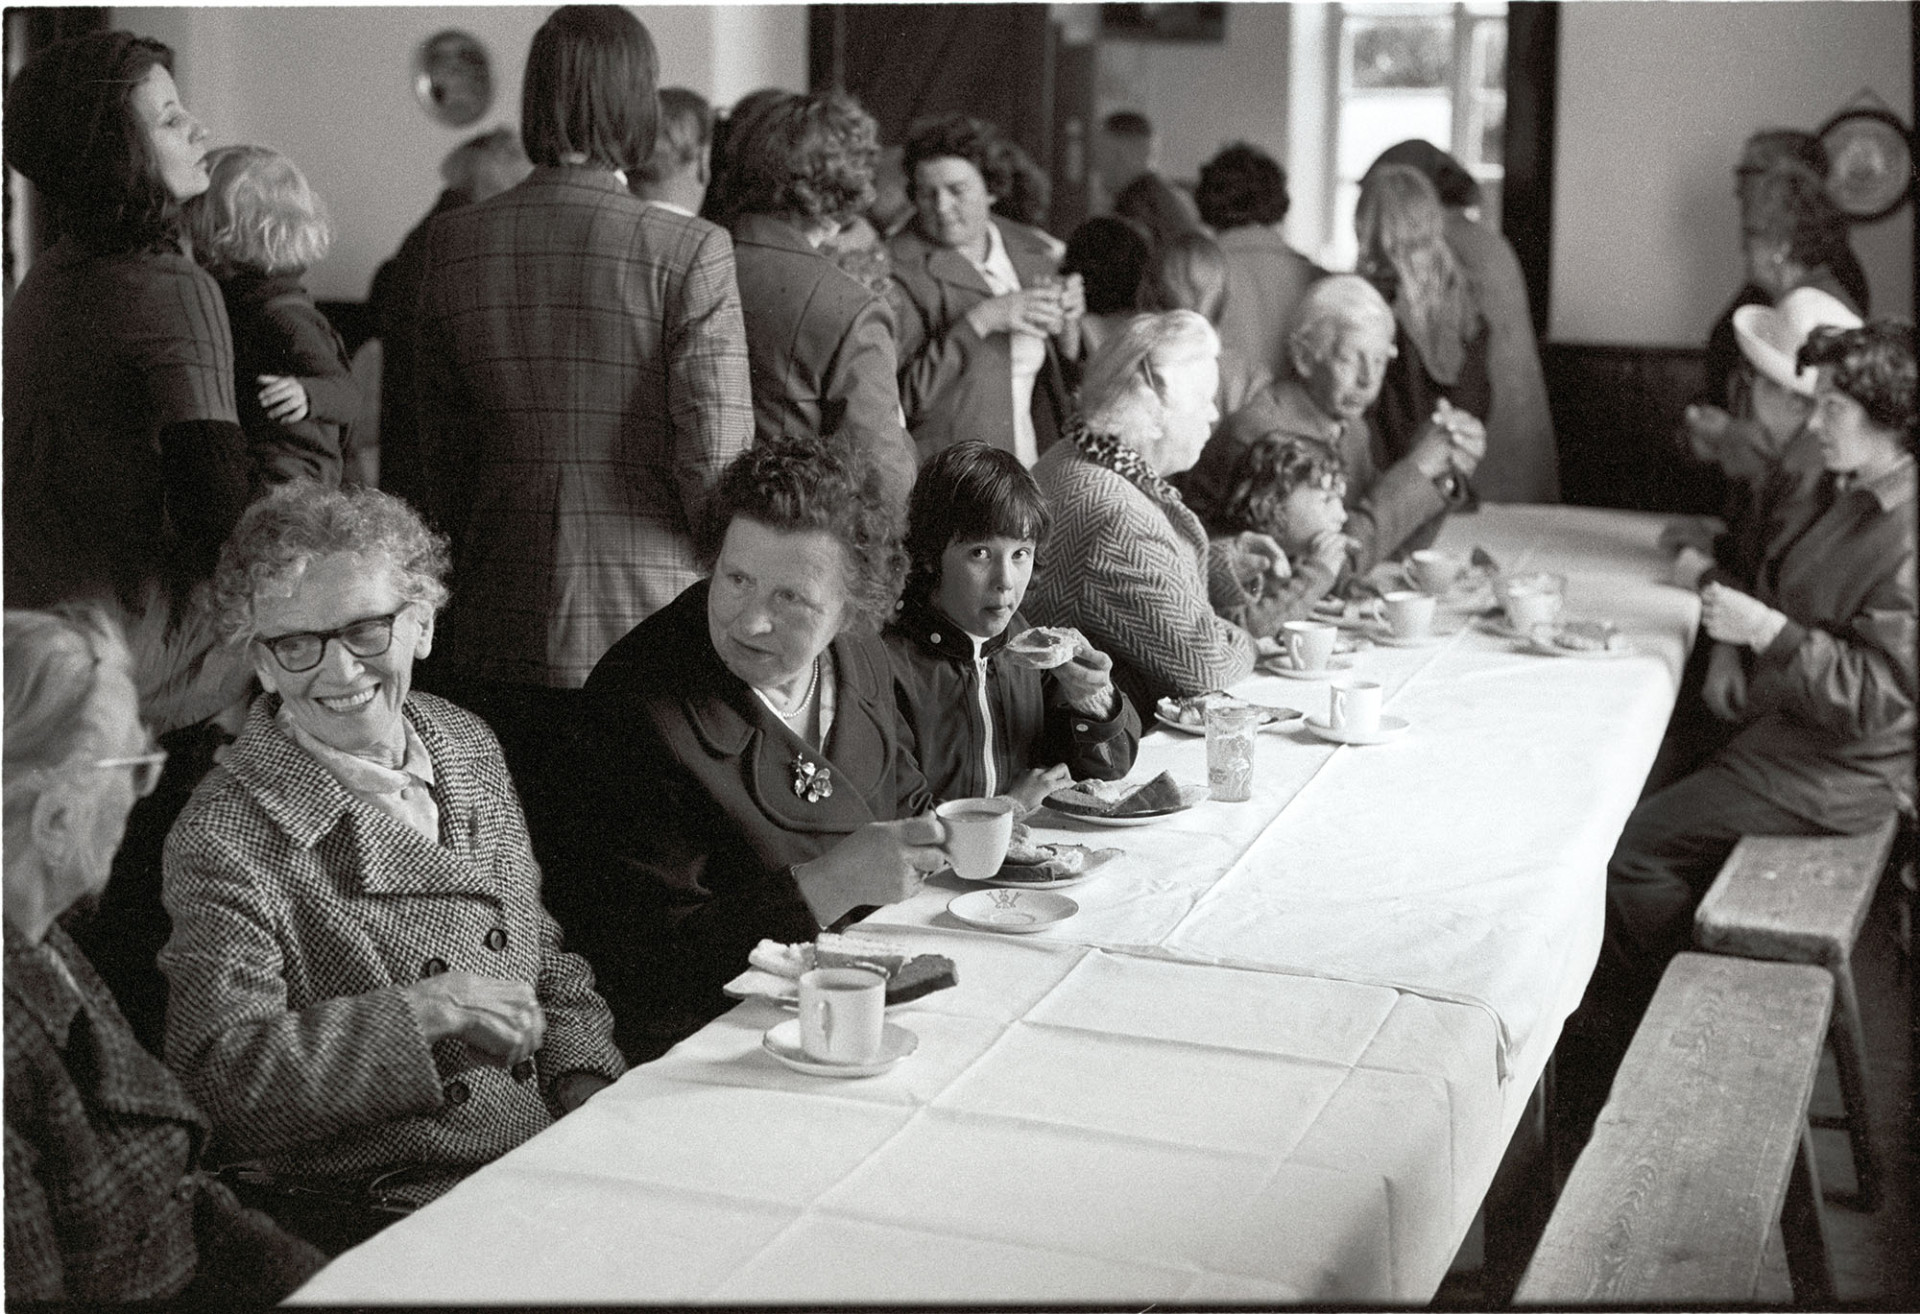 People having tea in village hall.
[People having tea and chatting in the village hall at Iddesleigh.]